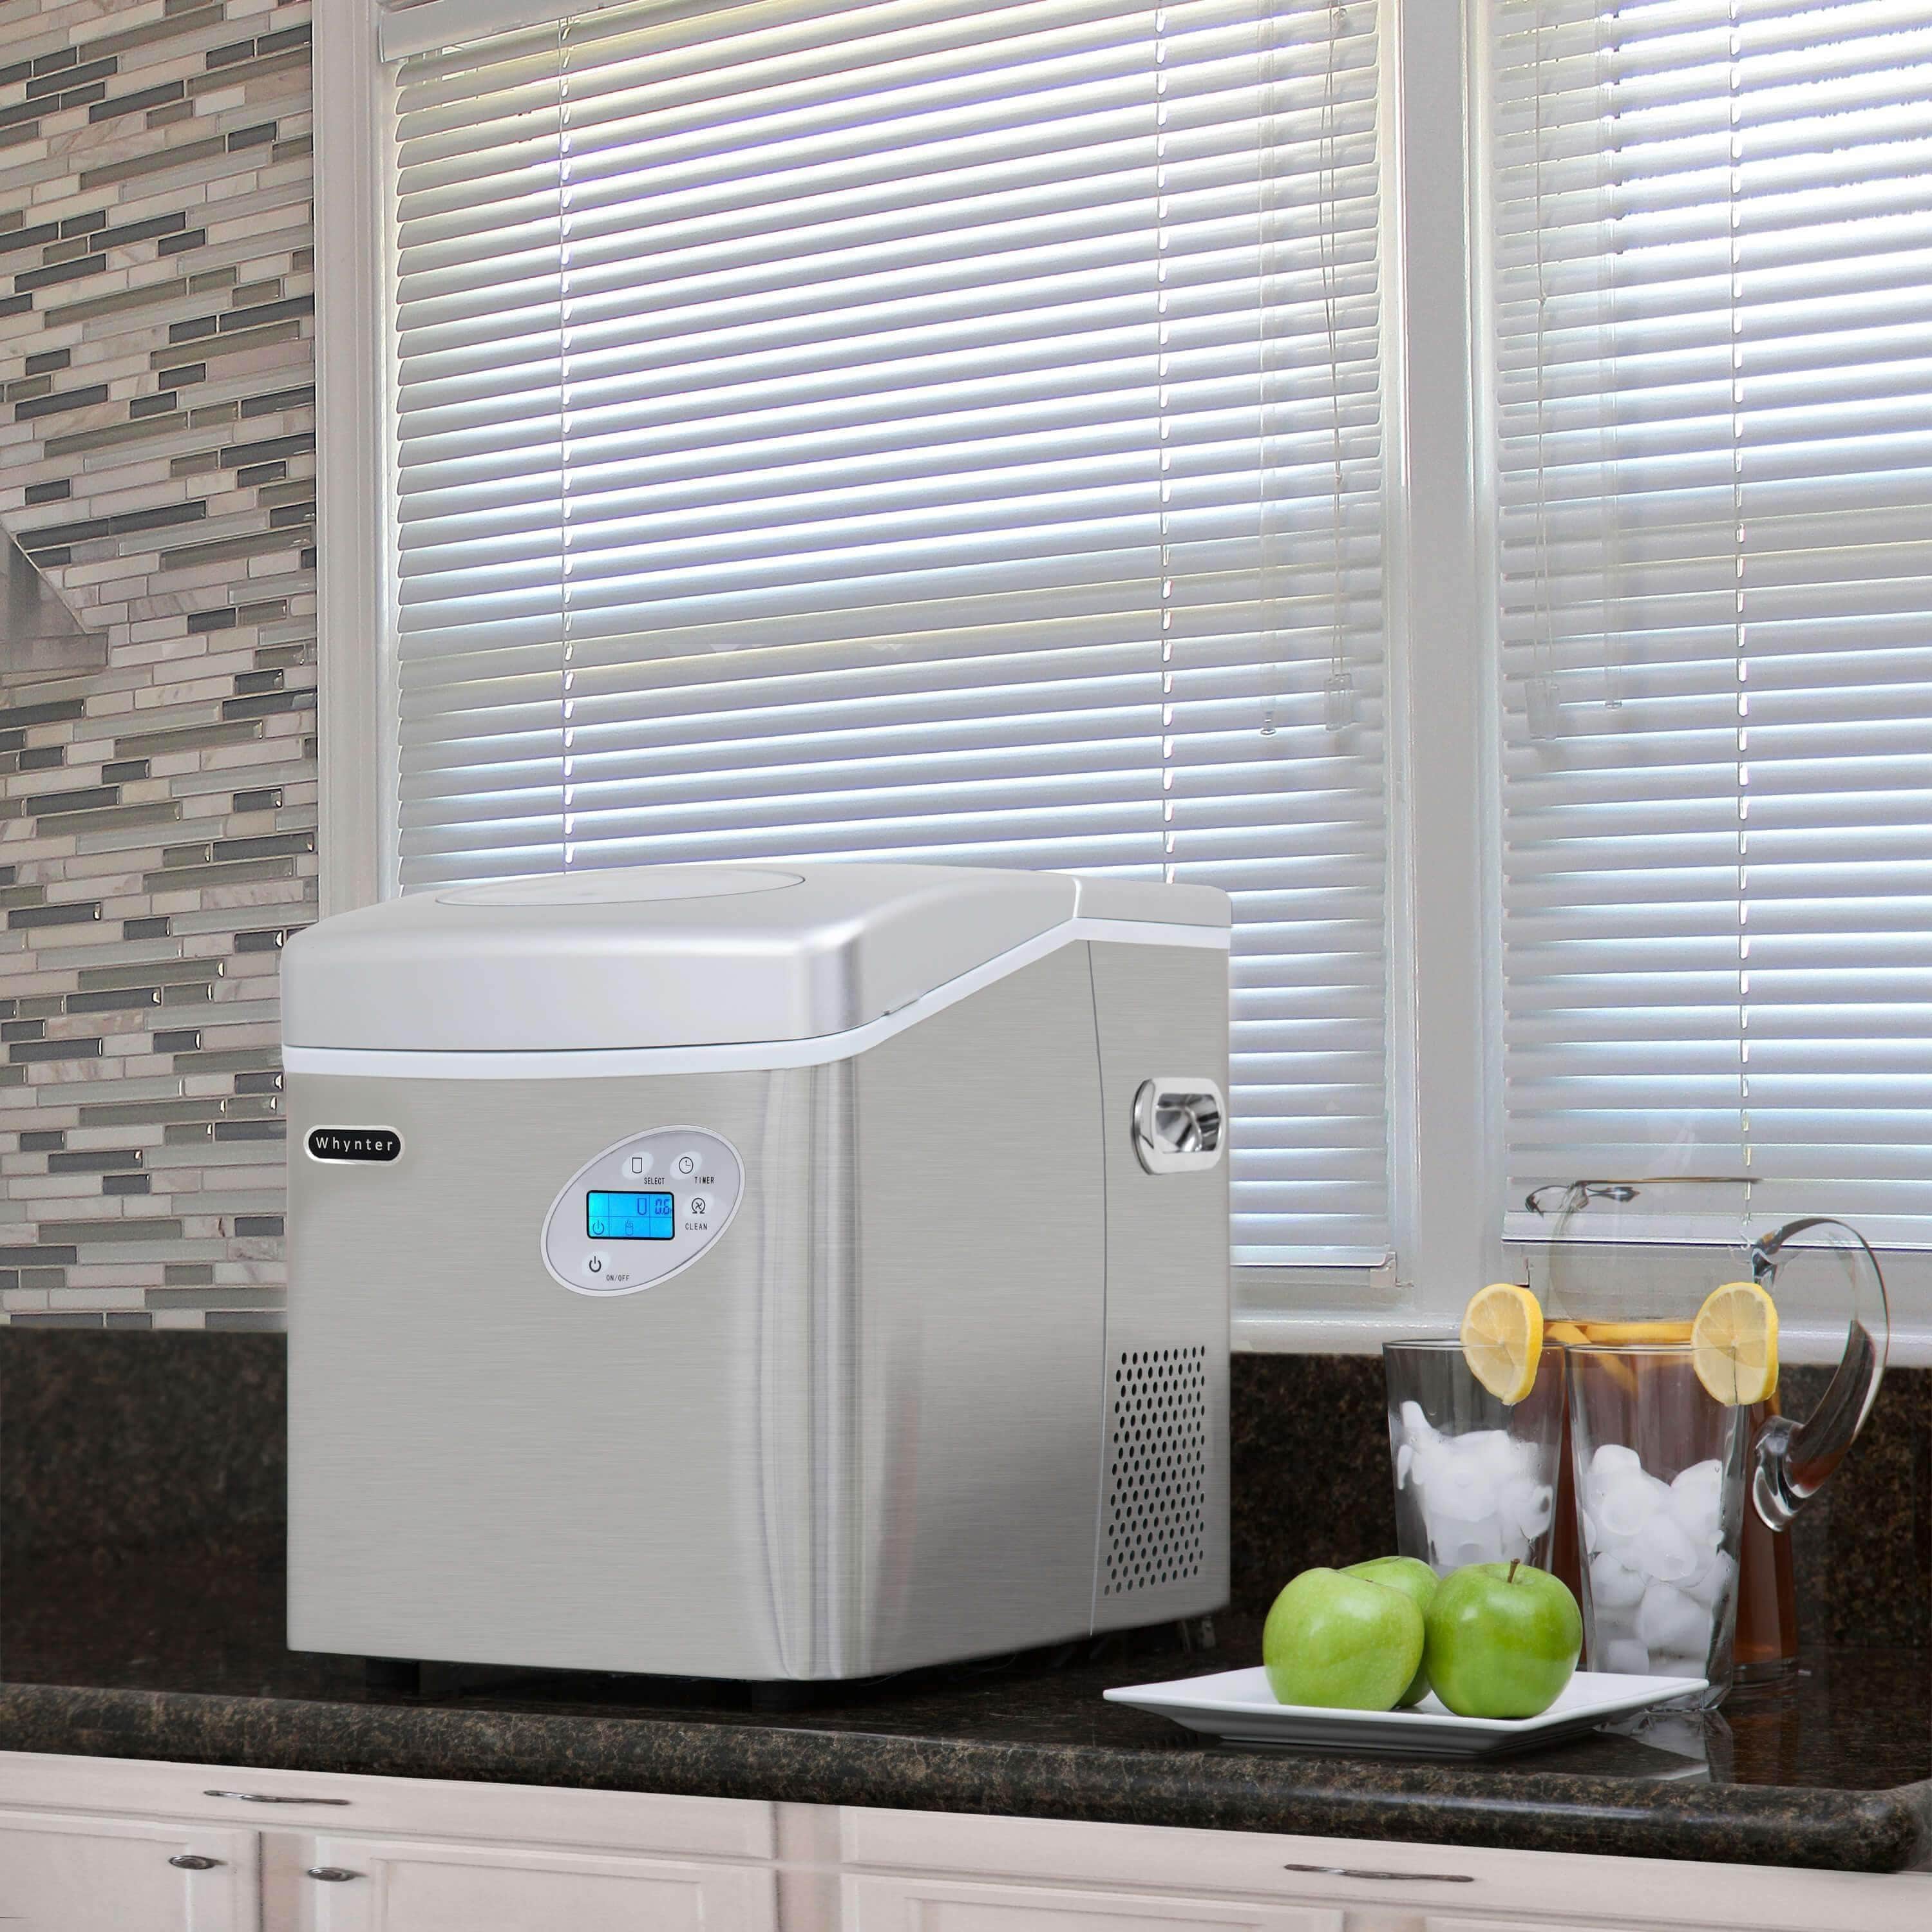 Whynter Portable Ice Maker with 49lb Capacity Stainless Steel with Water Connection IMC-491DC Wine Coolers Empire